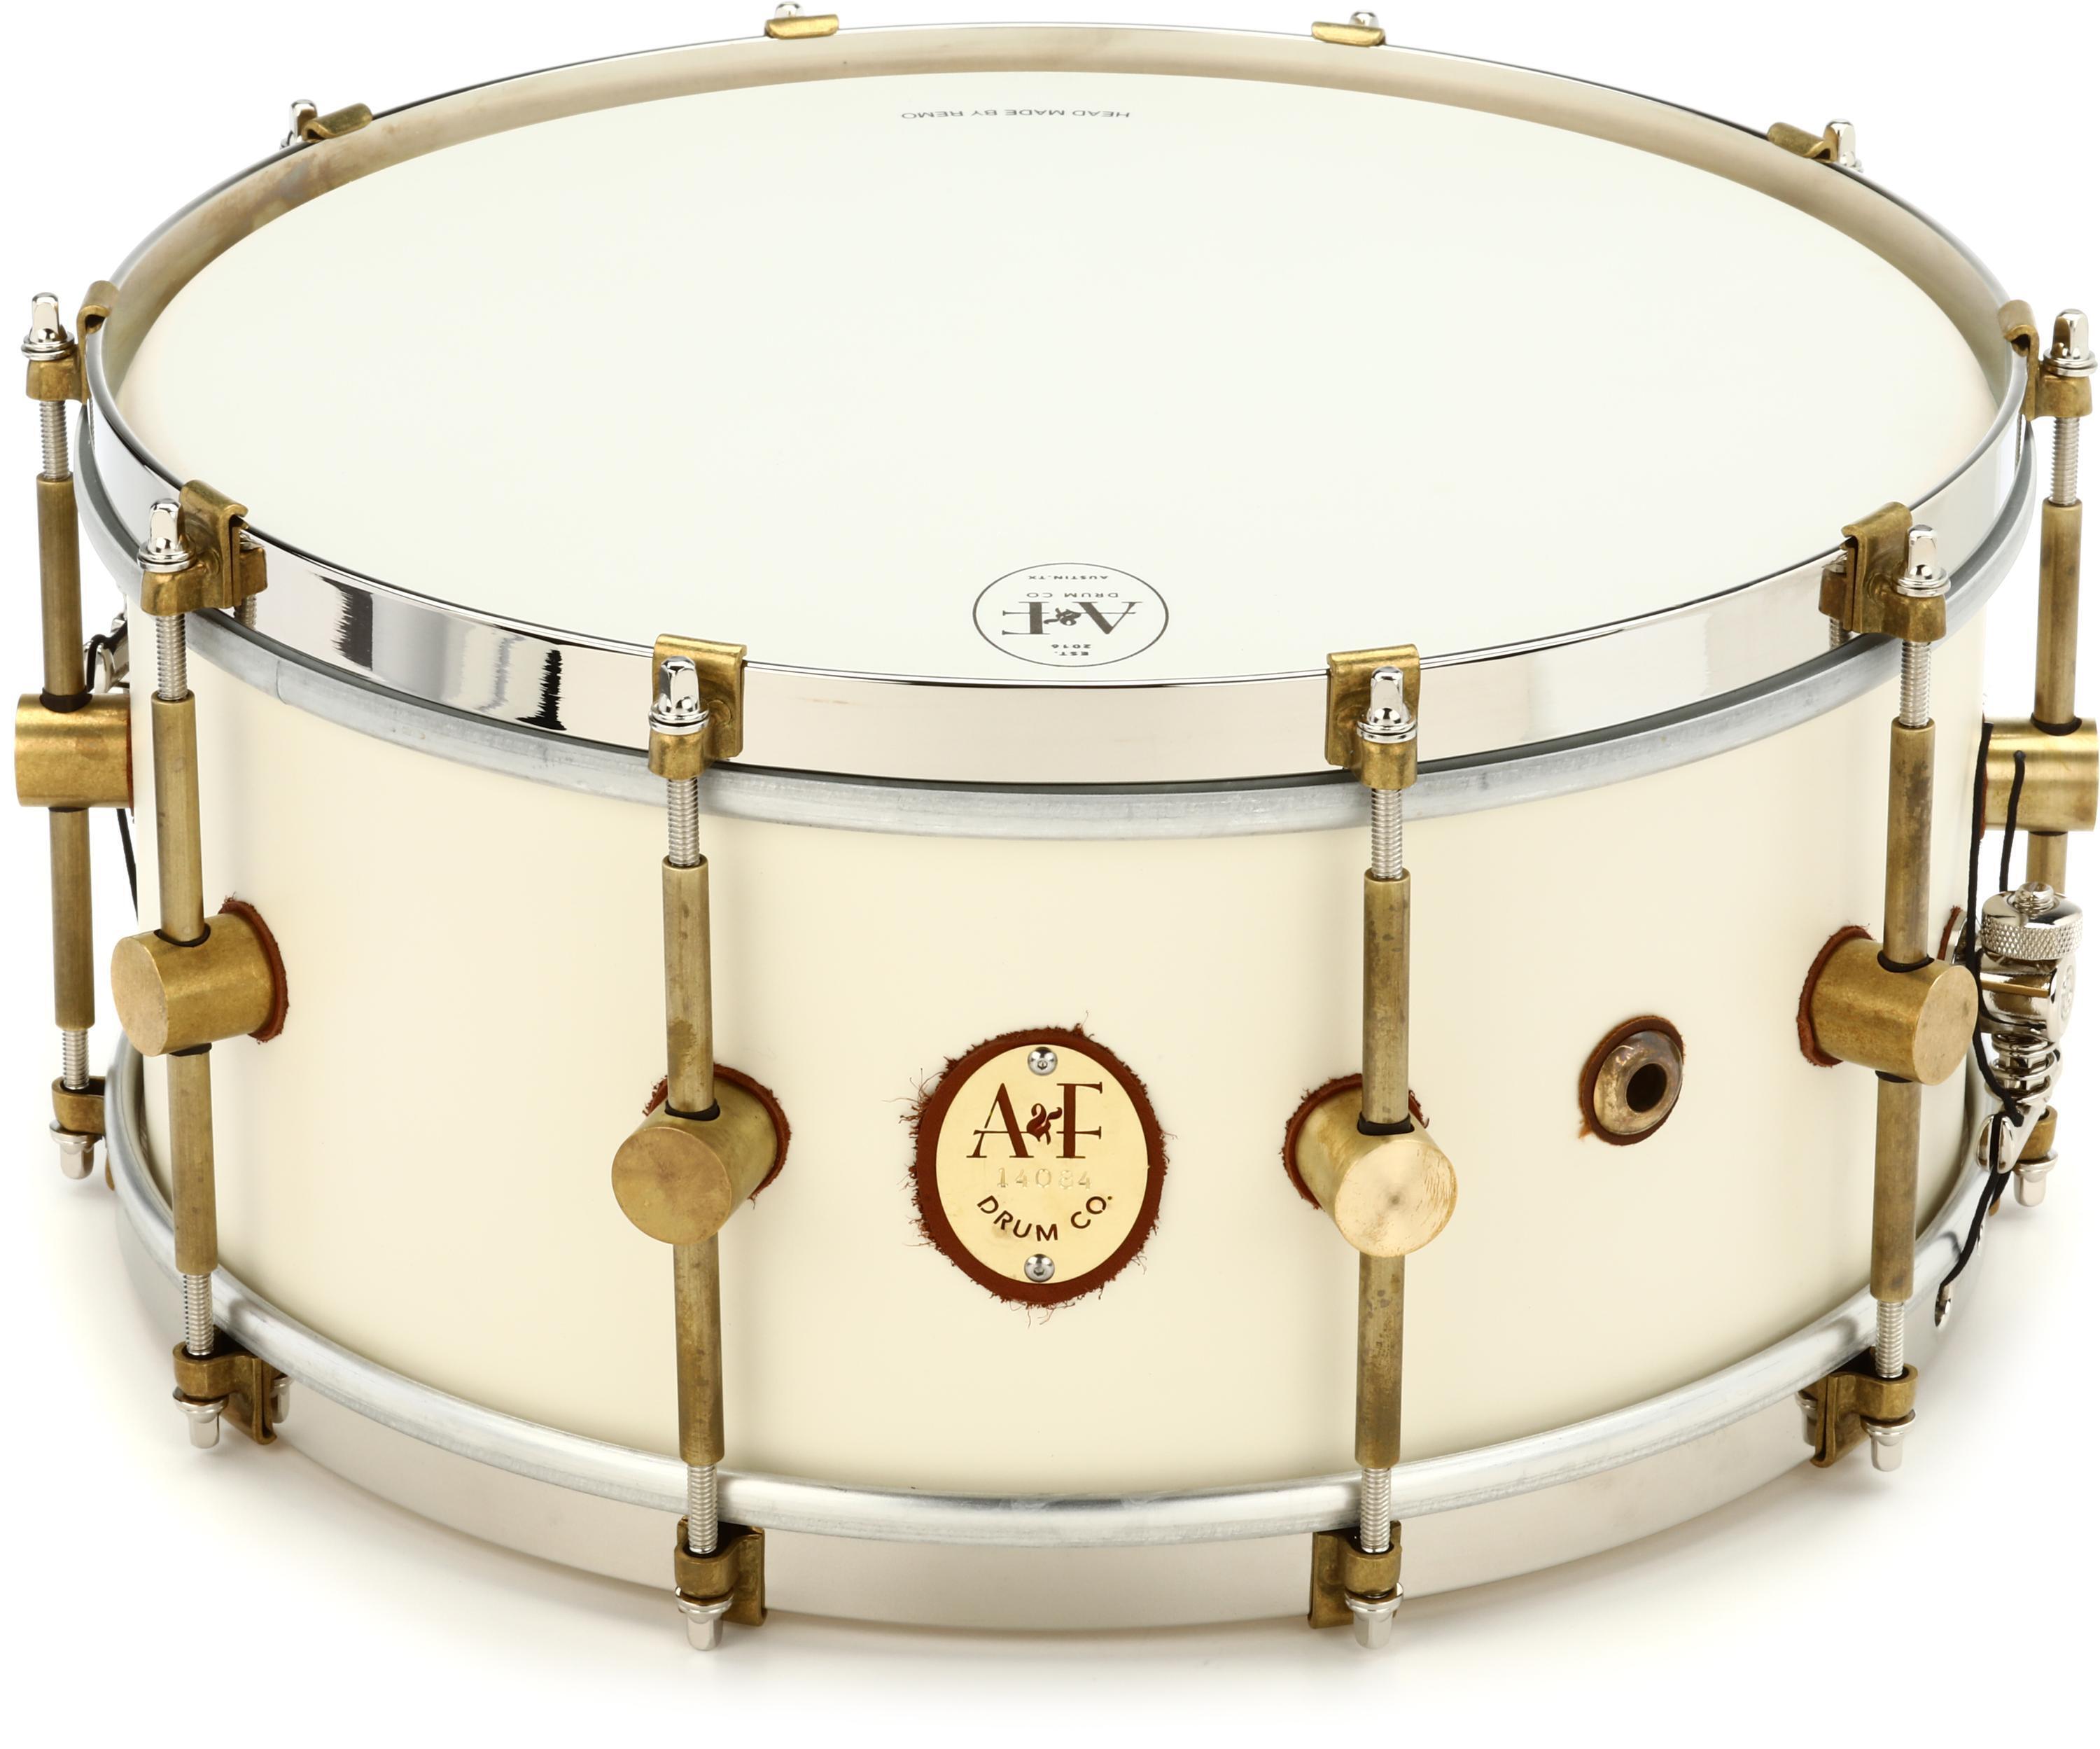 1901 Limited-edition Maple Snare Drum - 6.5-inch x 14-inch